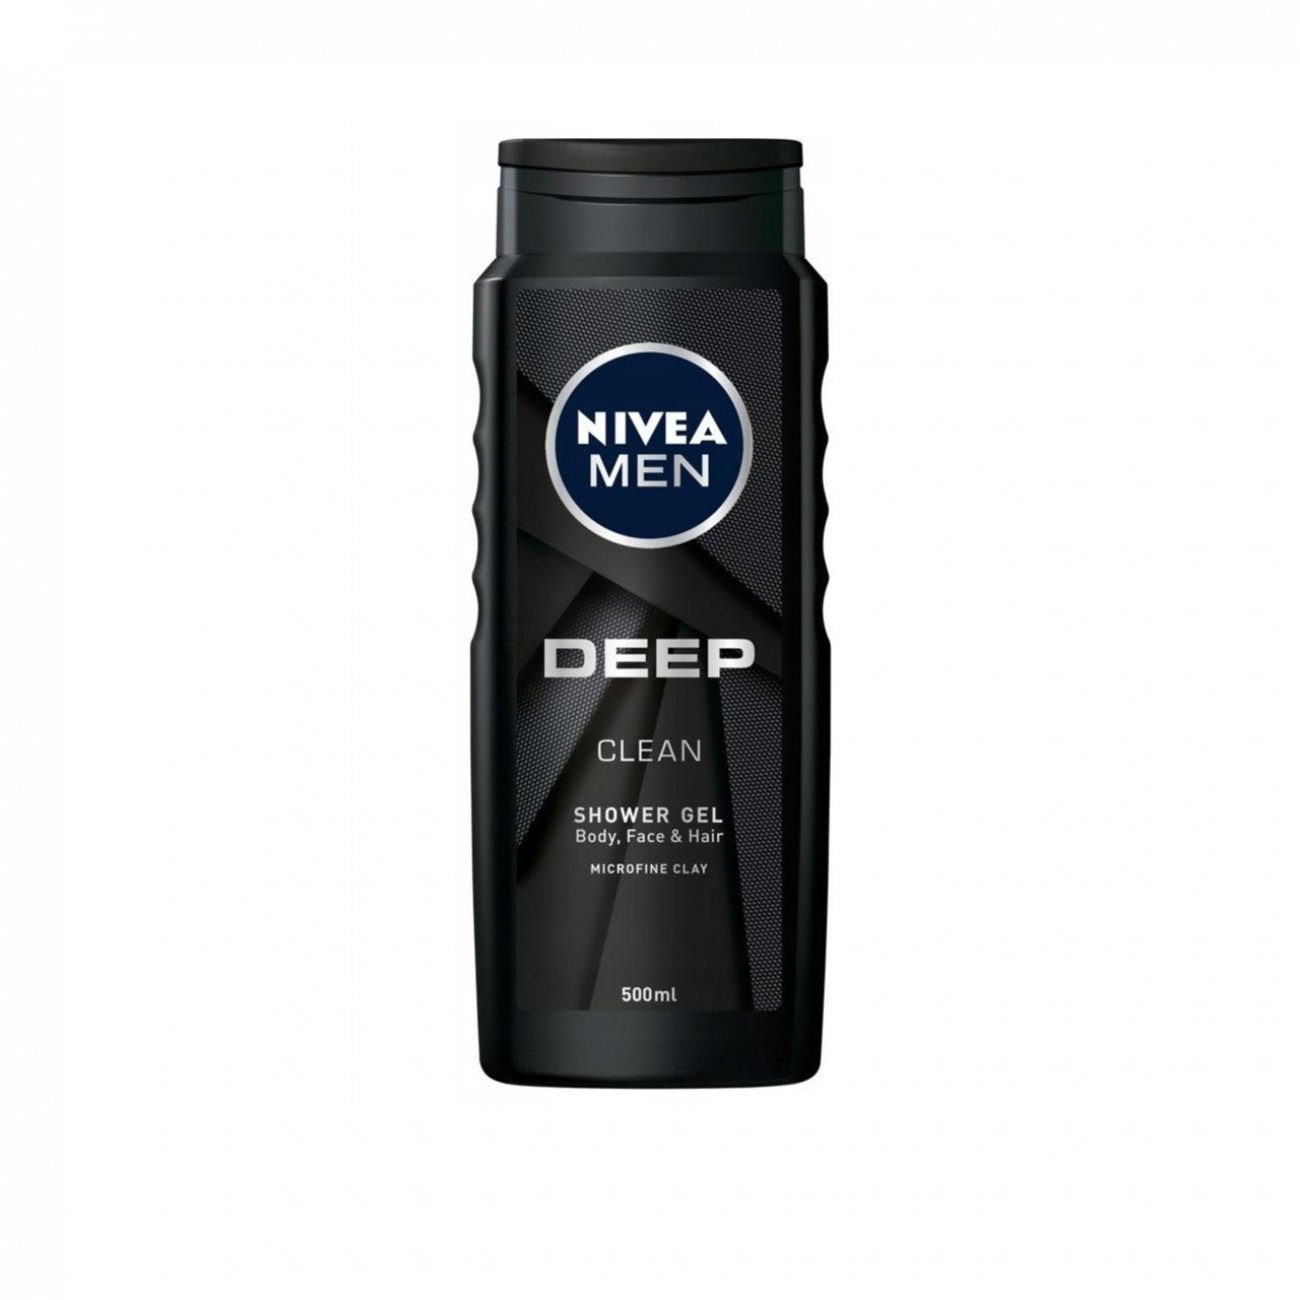 NIVEA Body Wash Active Clean with Active Charcoal Shower Gel for Body  Face  Hair Buy NIVEA Body Wash Active Clean with Active Charcoal Shower  Gel for Body Face  Hair at